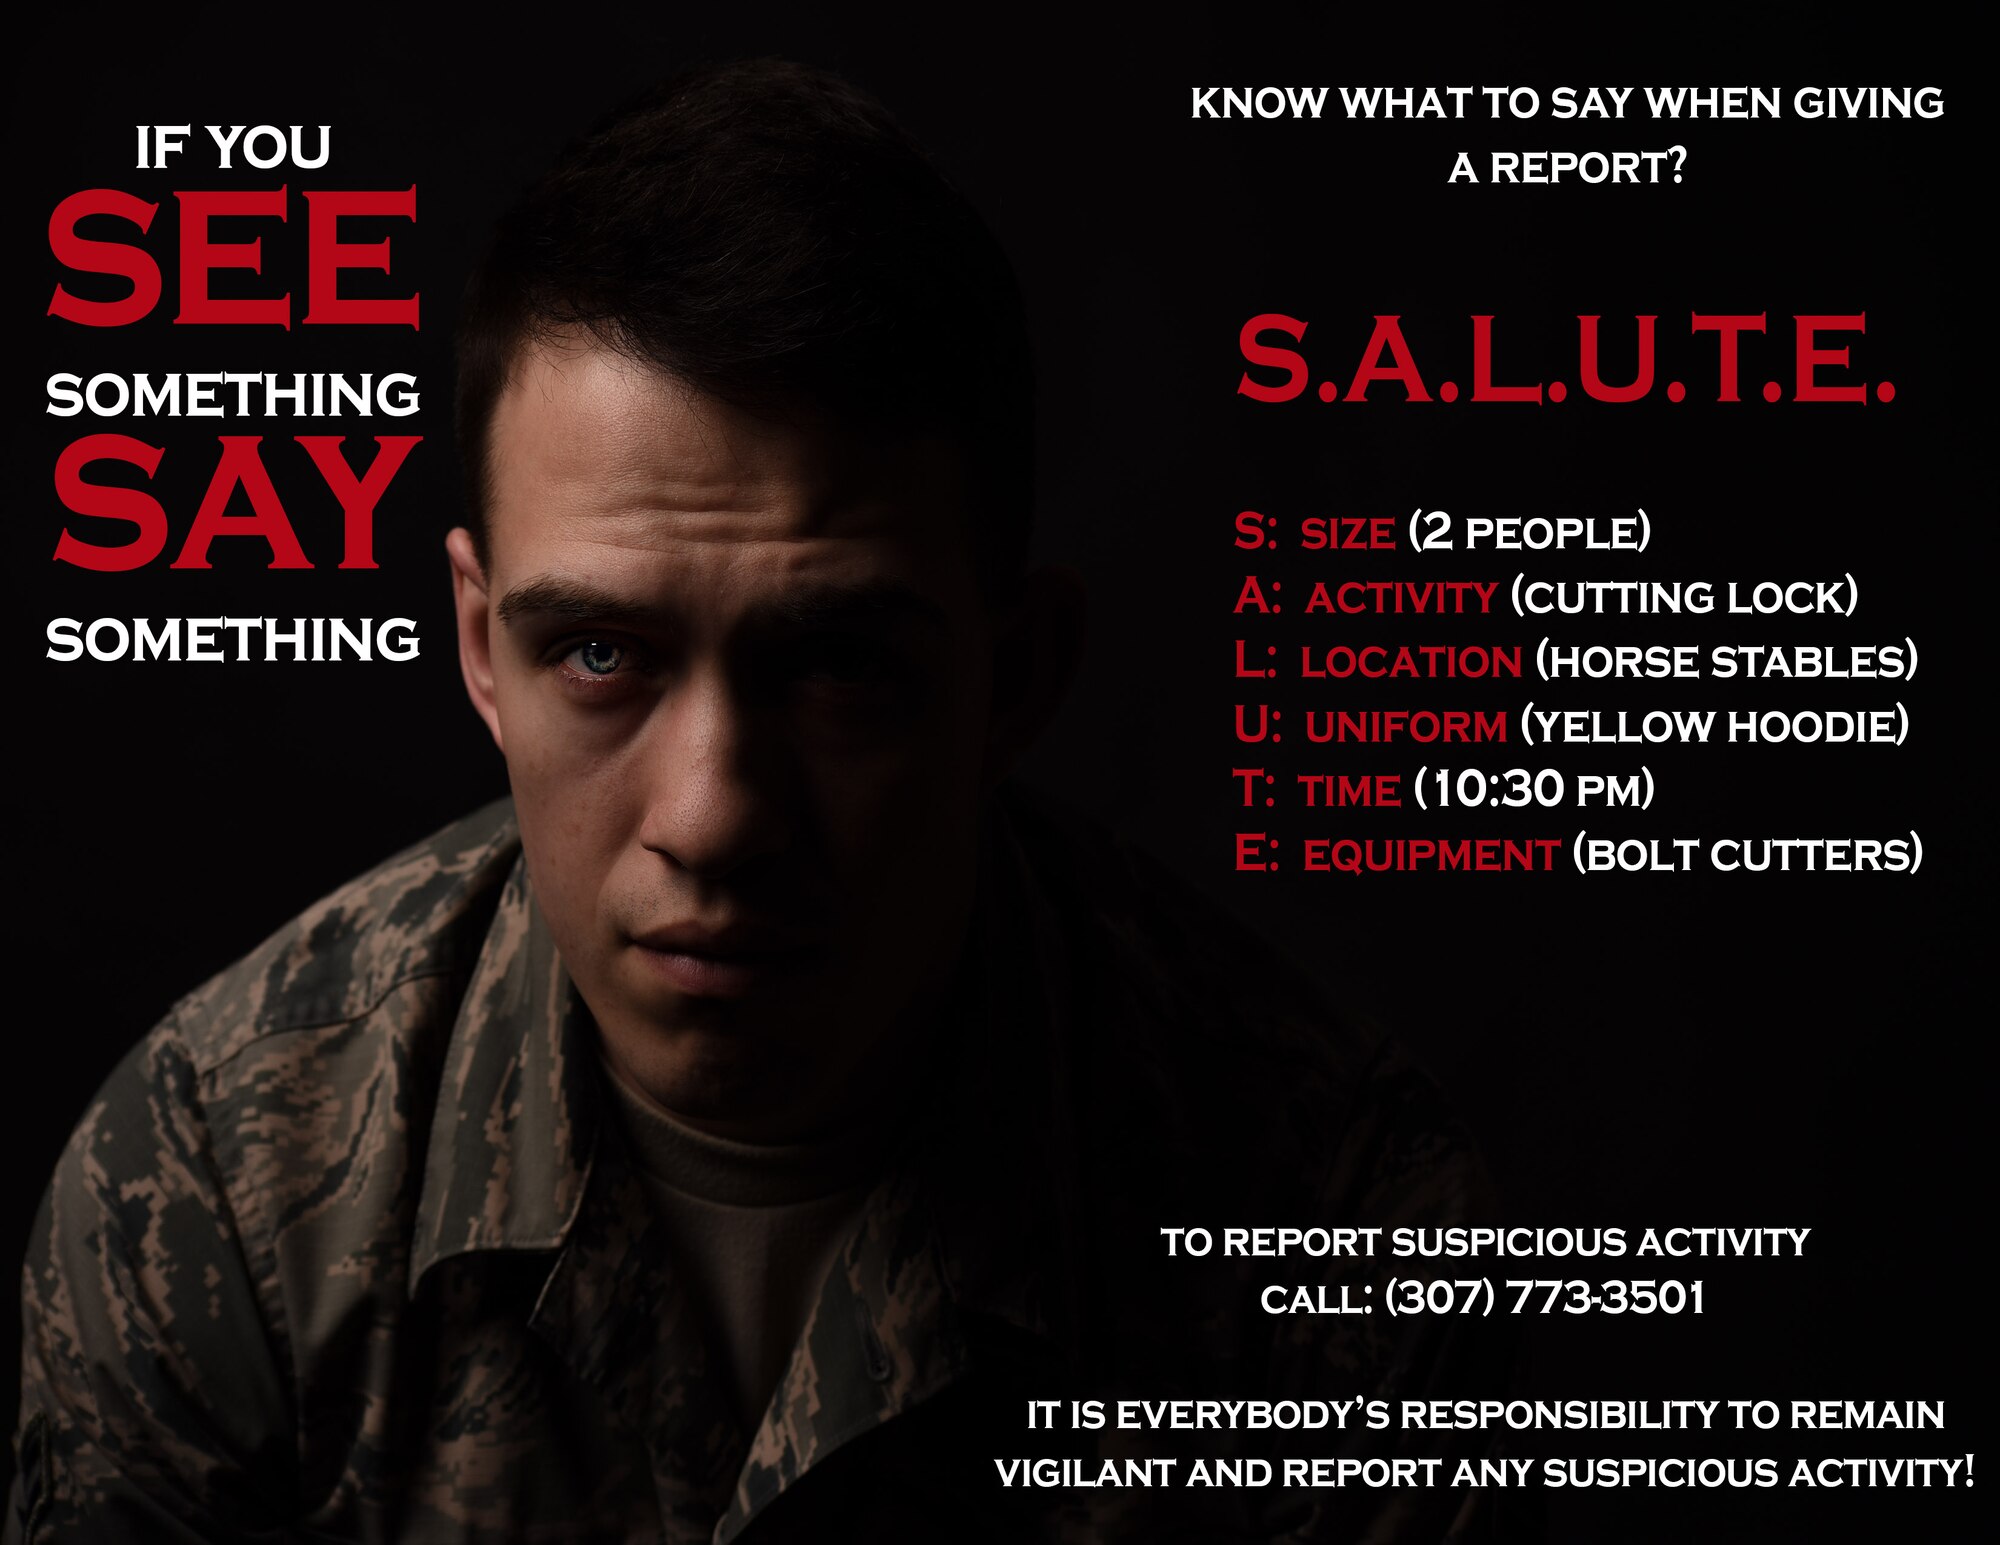 Graphic explains SALUTE, which stands for size, activity, location, uniform, time, and equipment.